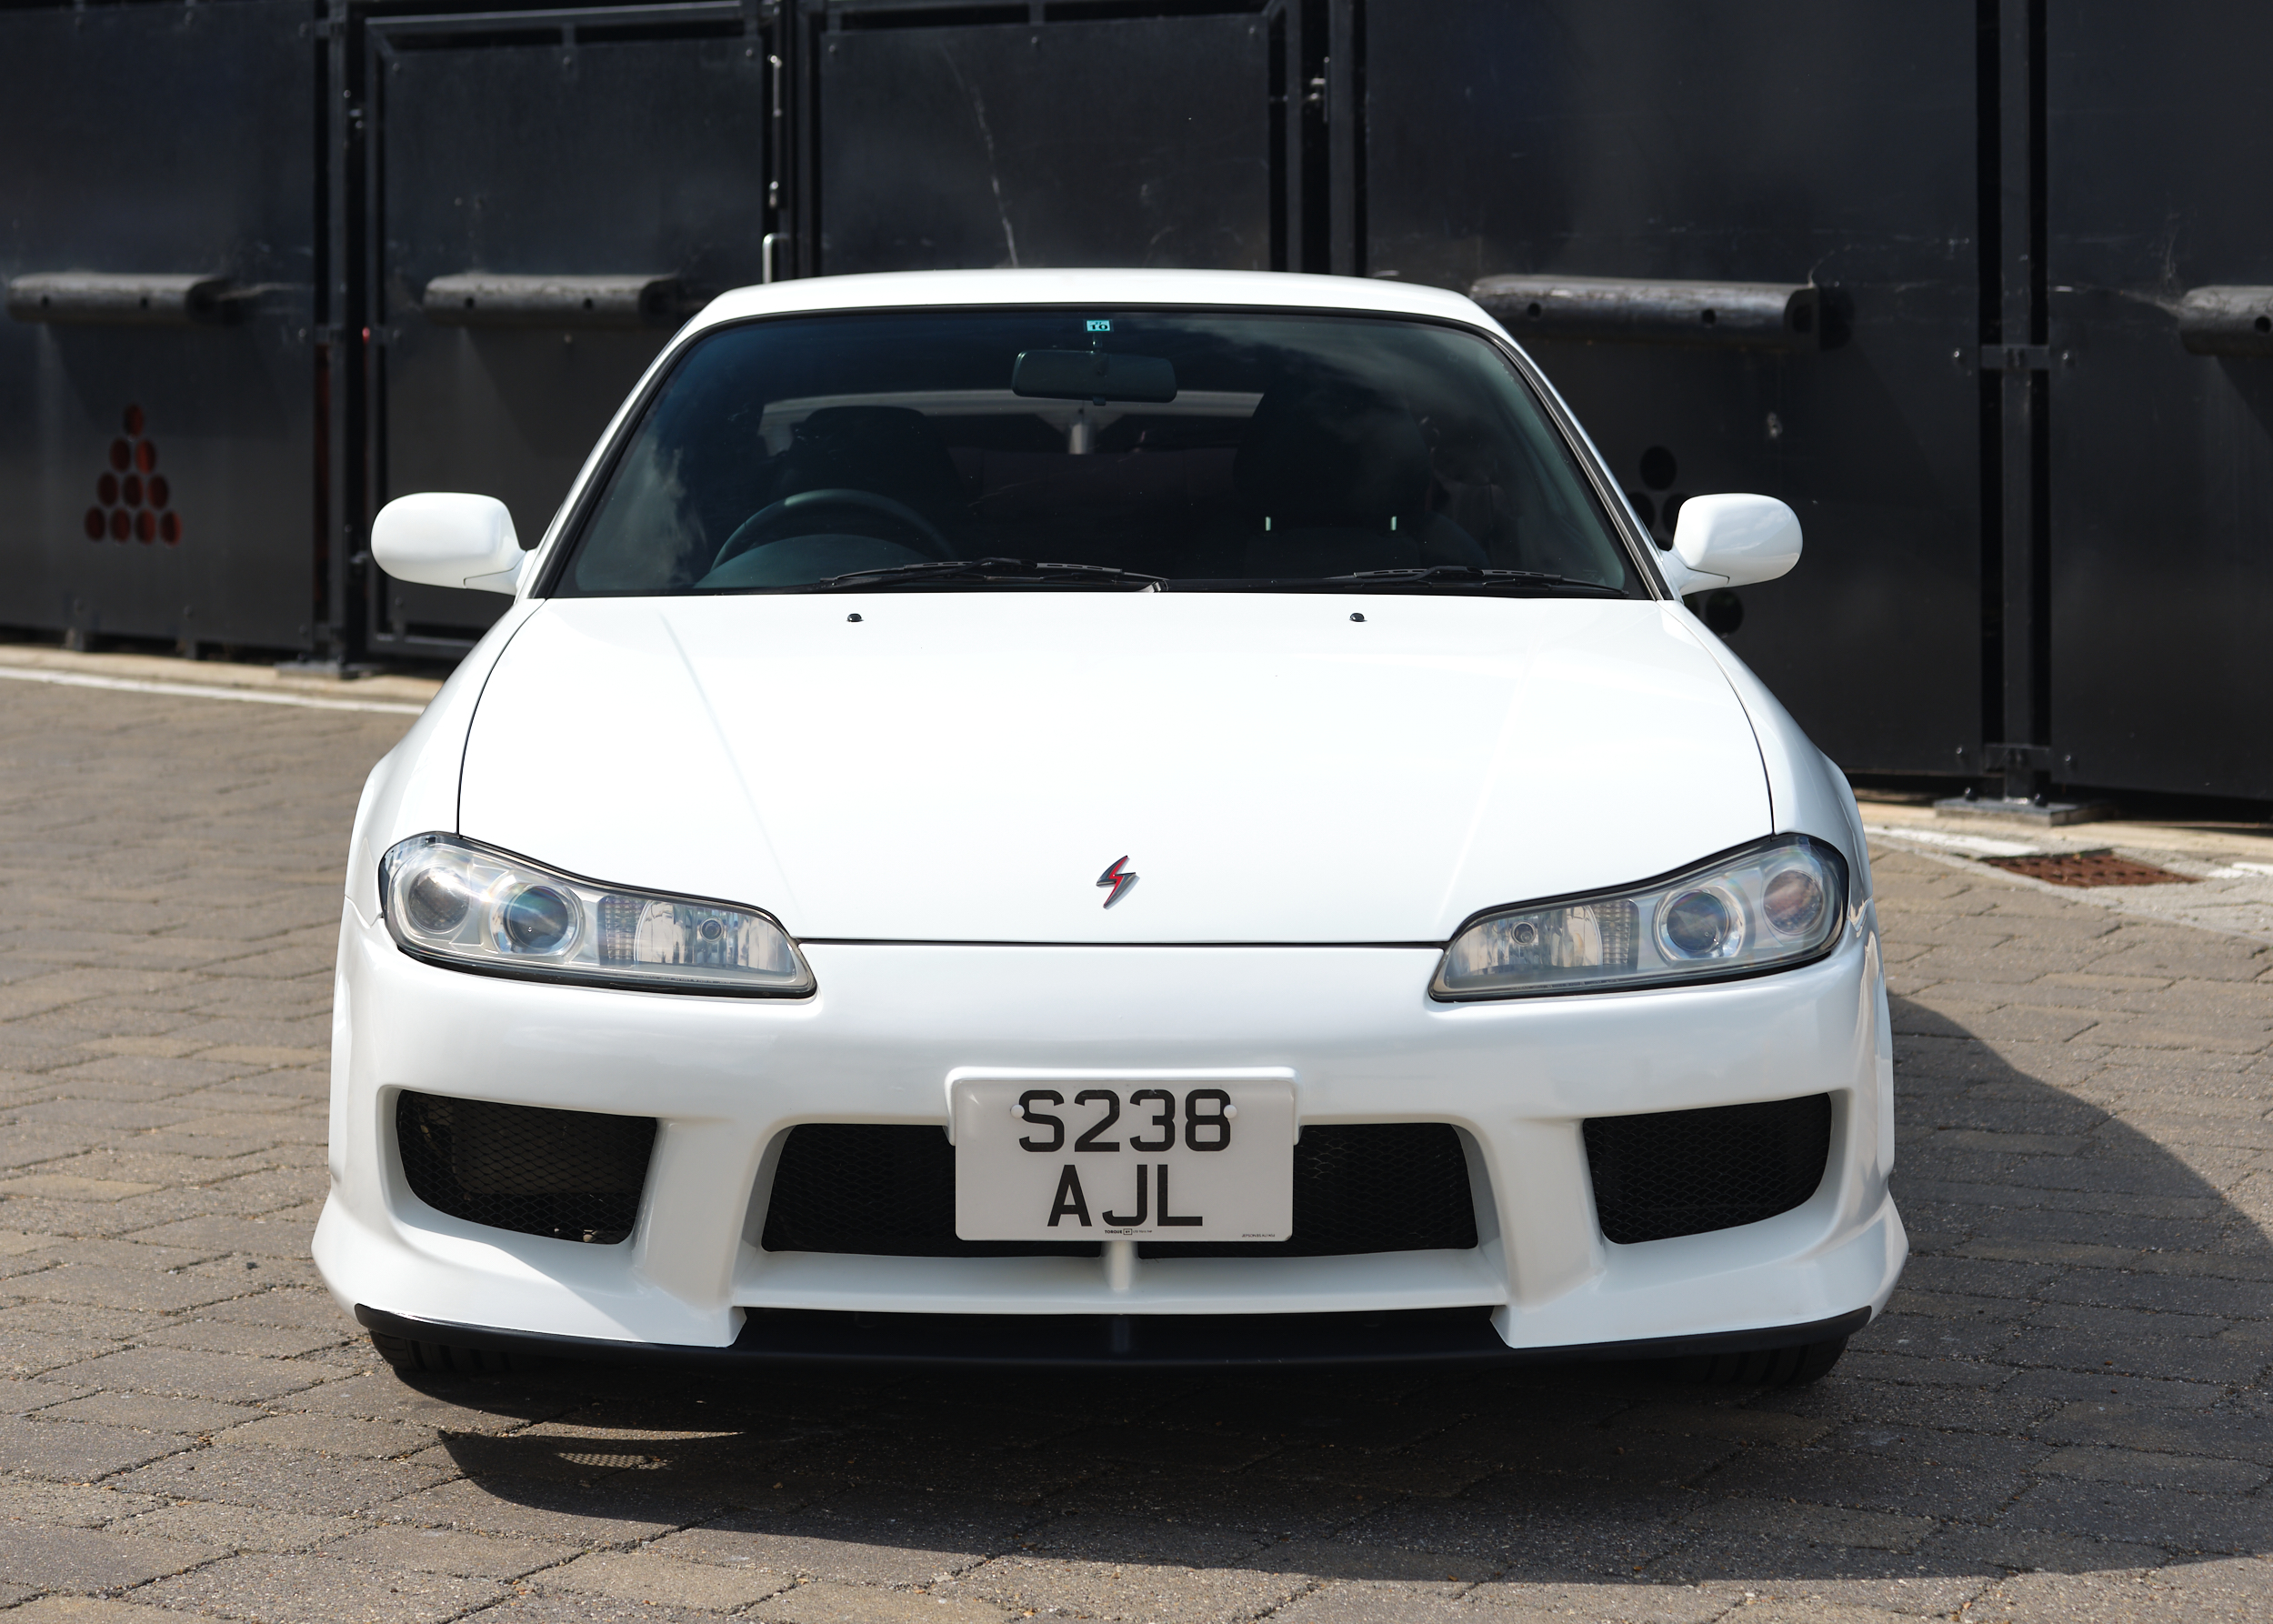 1999 NISSAN SILVIA (S15) SPEC R for sale by auction in London